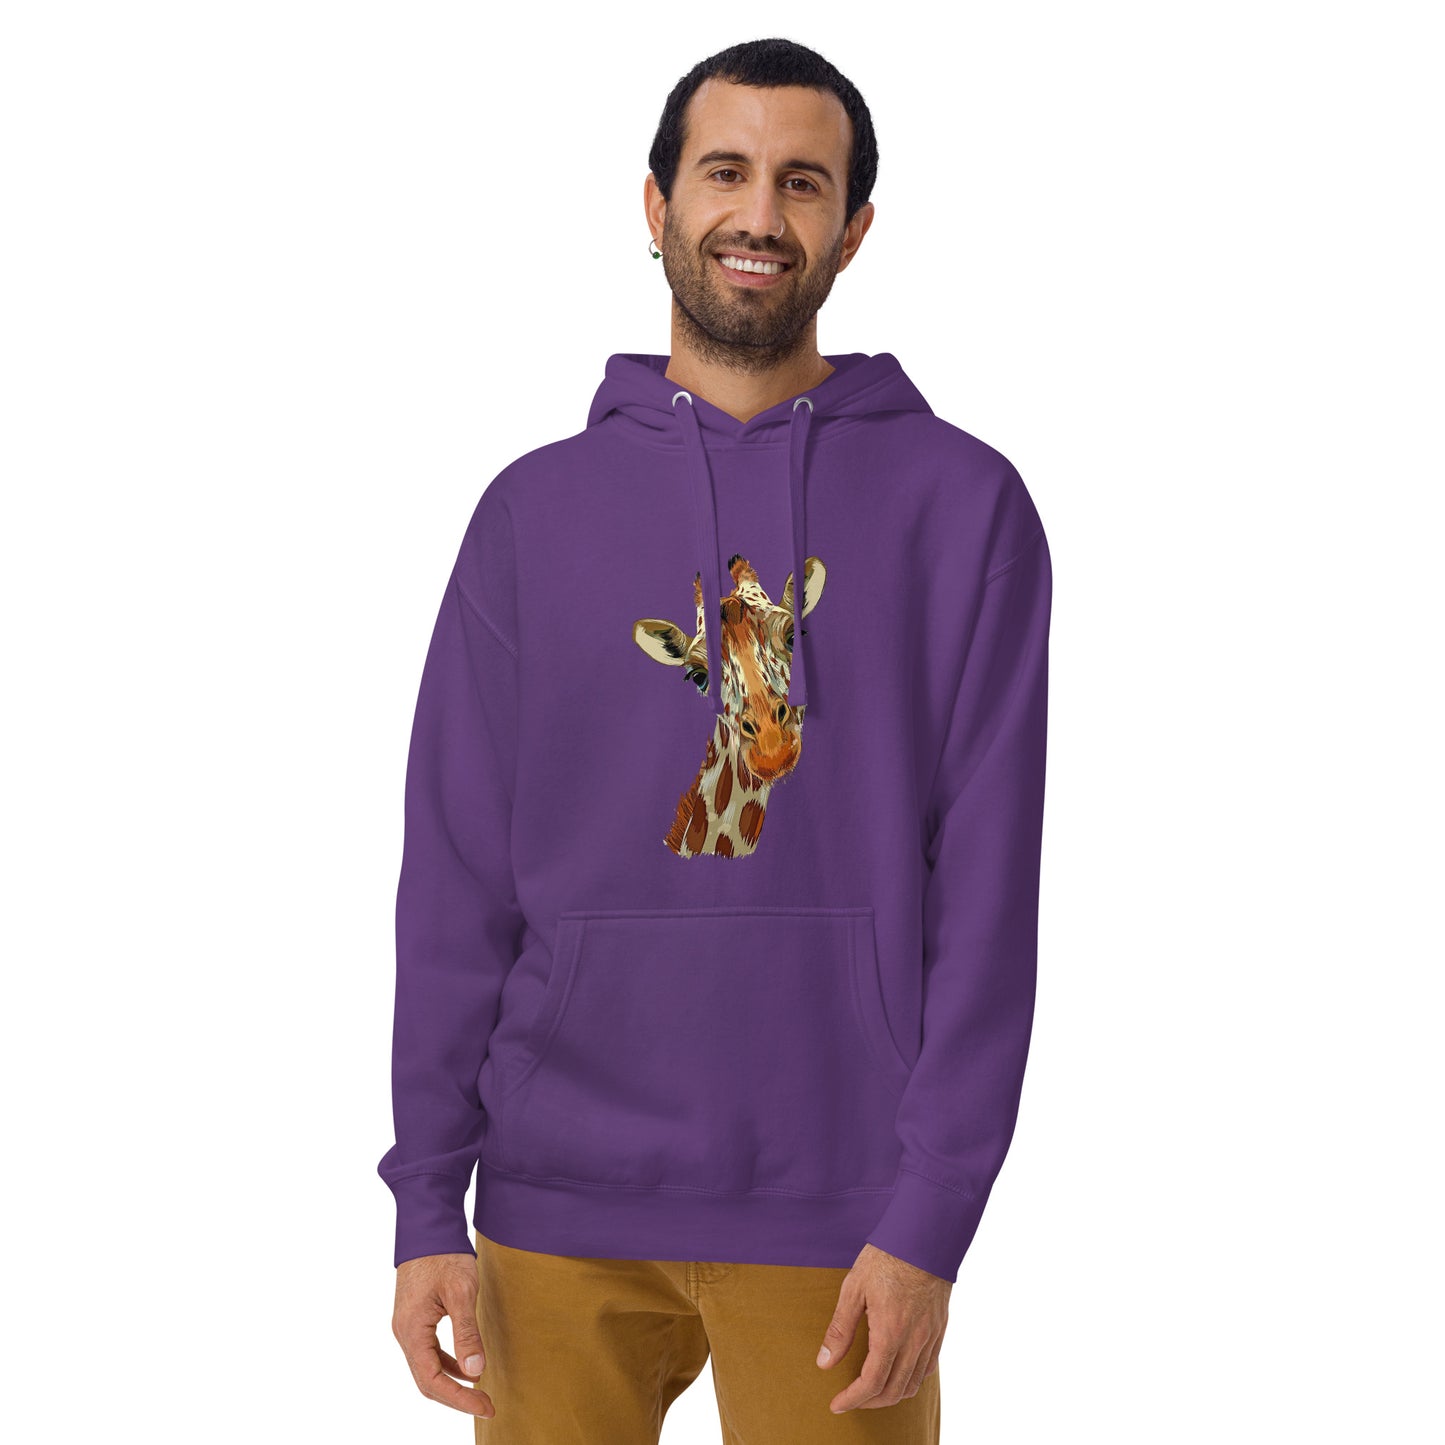 Men and womens Hoodie printed with a giraffe